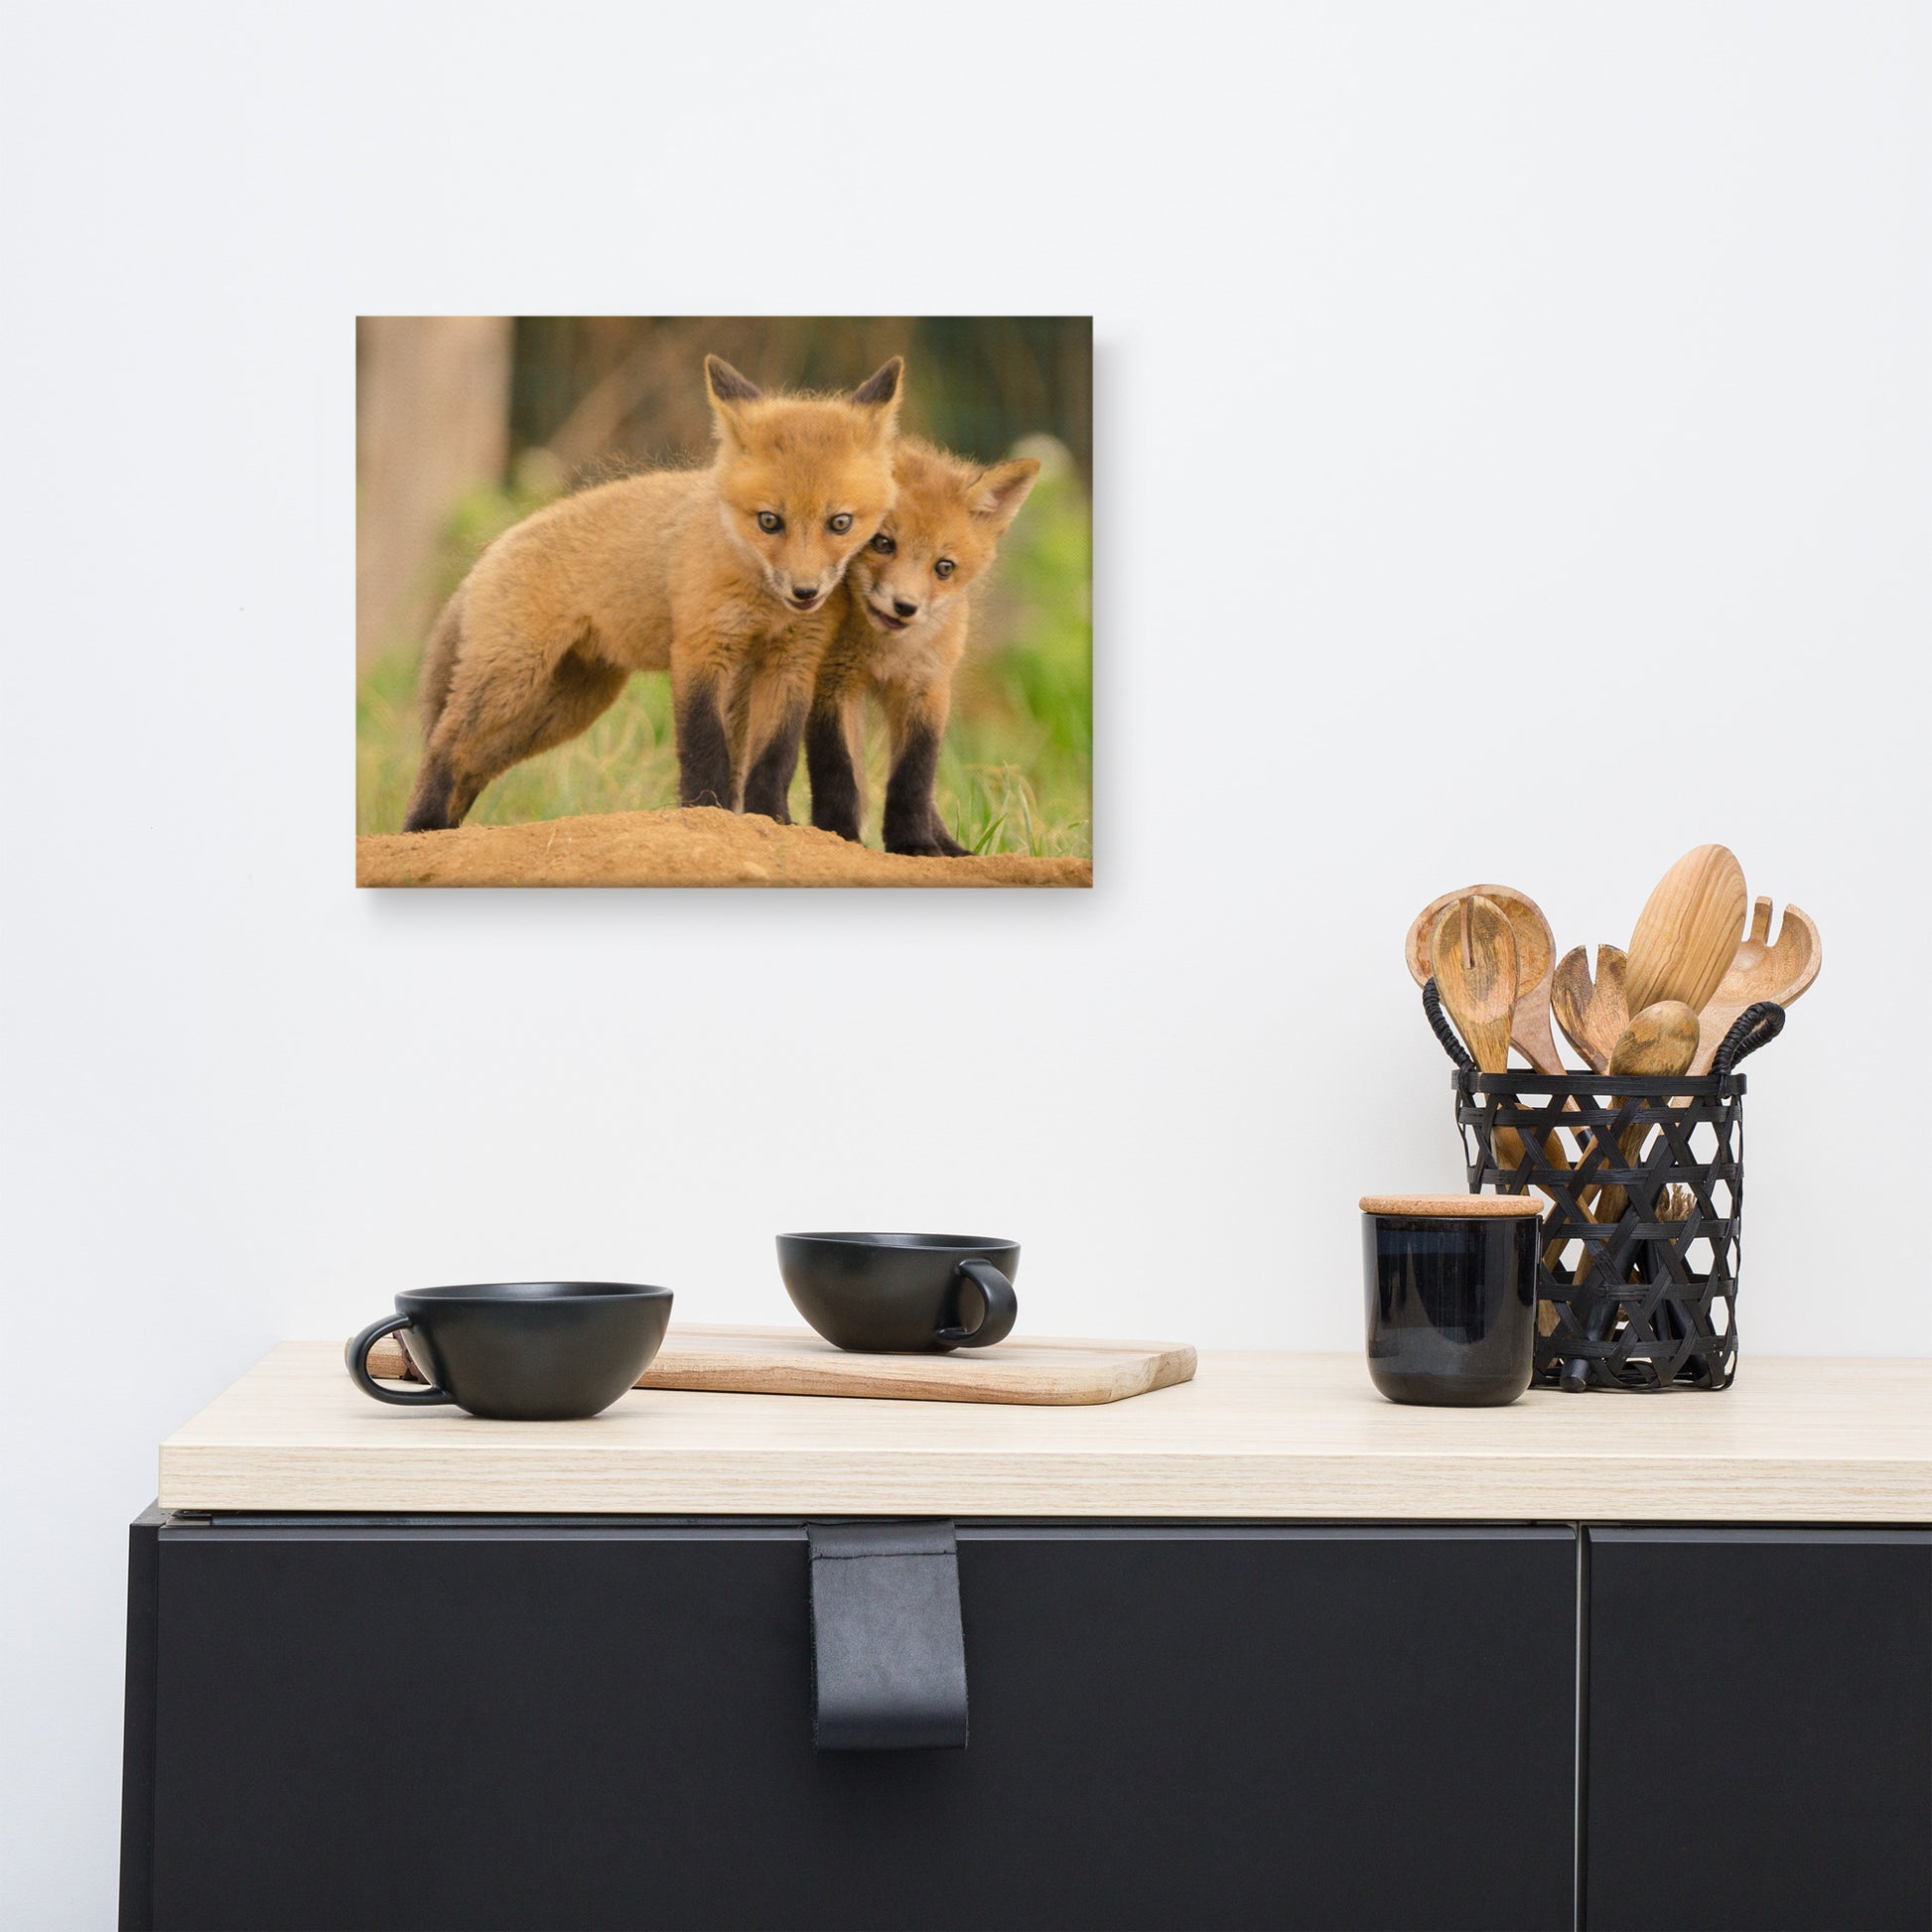 Cool Wall Decor For Bedroom: Close to You Baby Fox Pups - Animal / Wildlife / Nature Photograph Wall Art Print- Artwork - Wall Decor